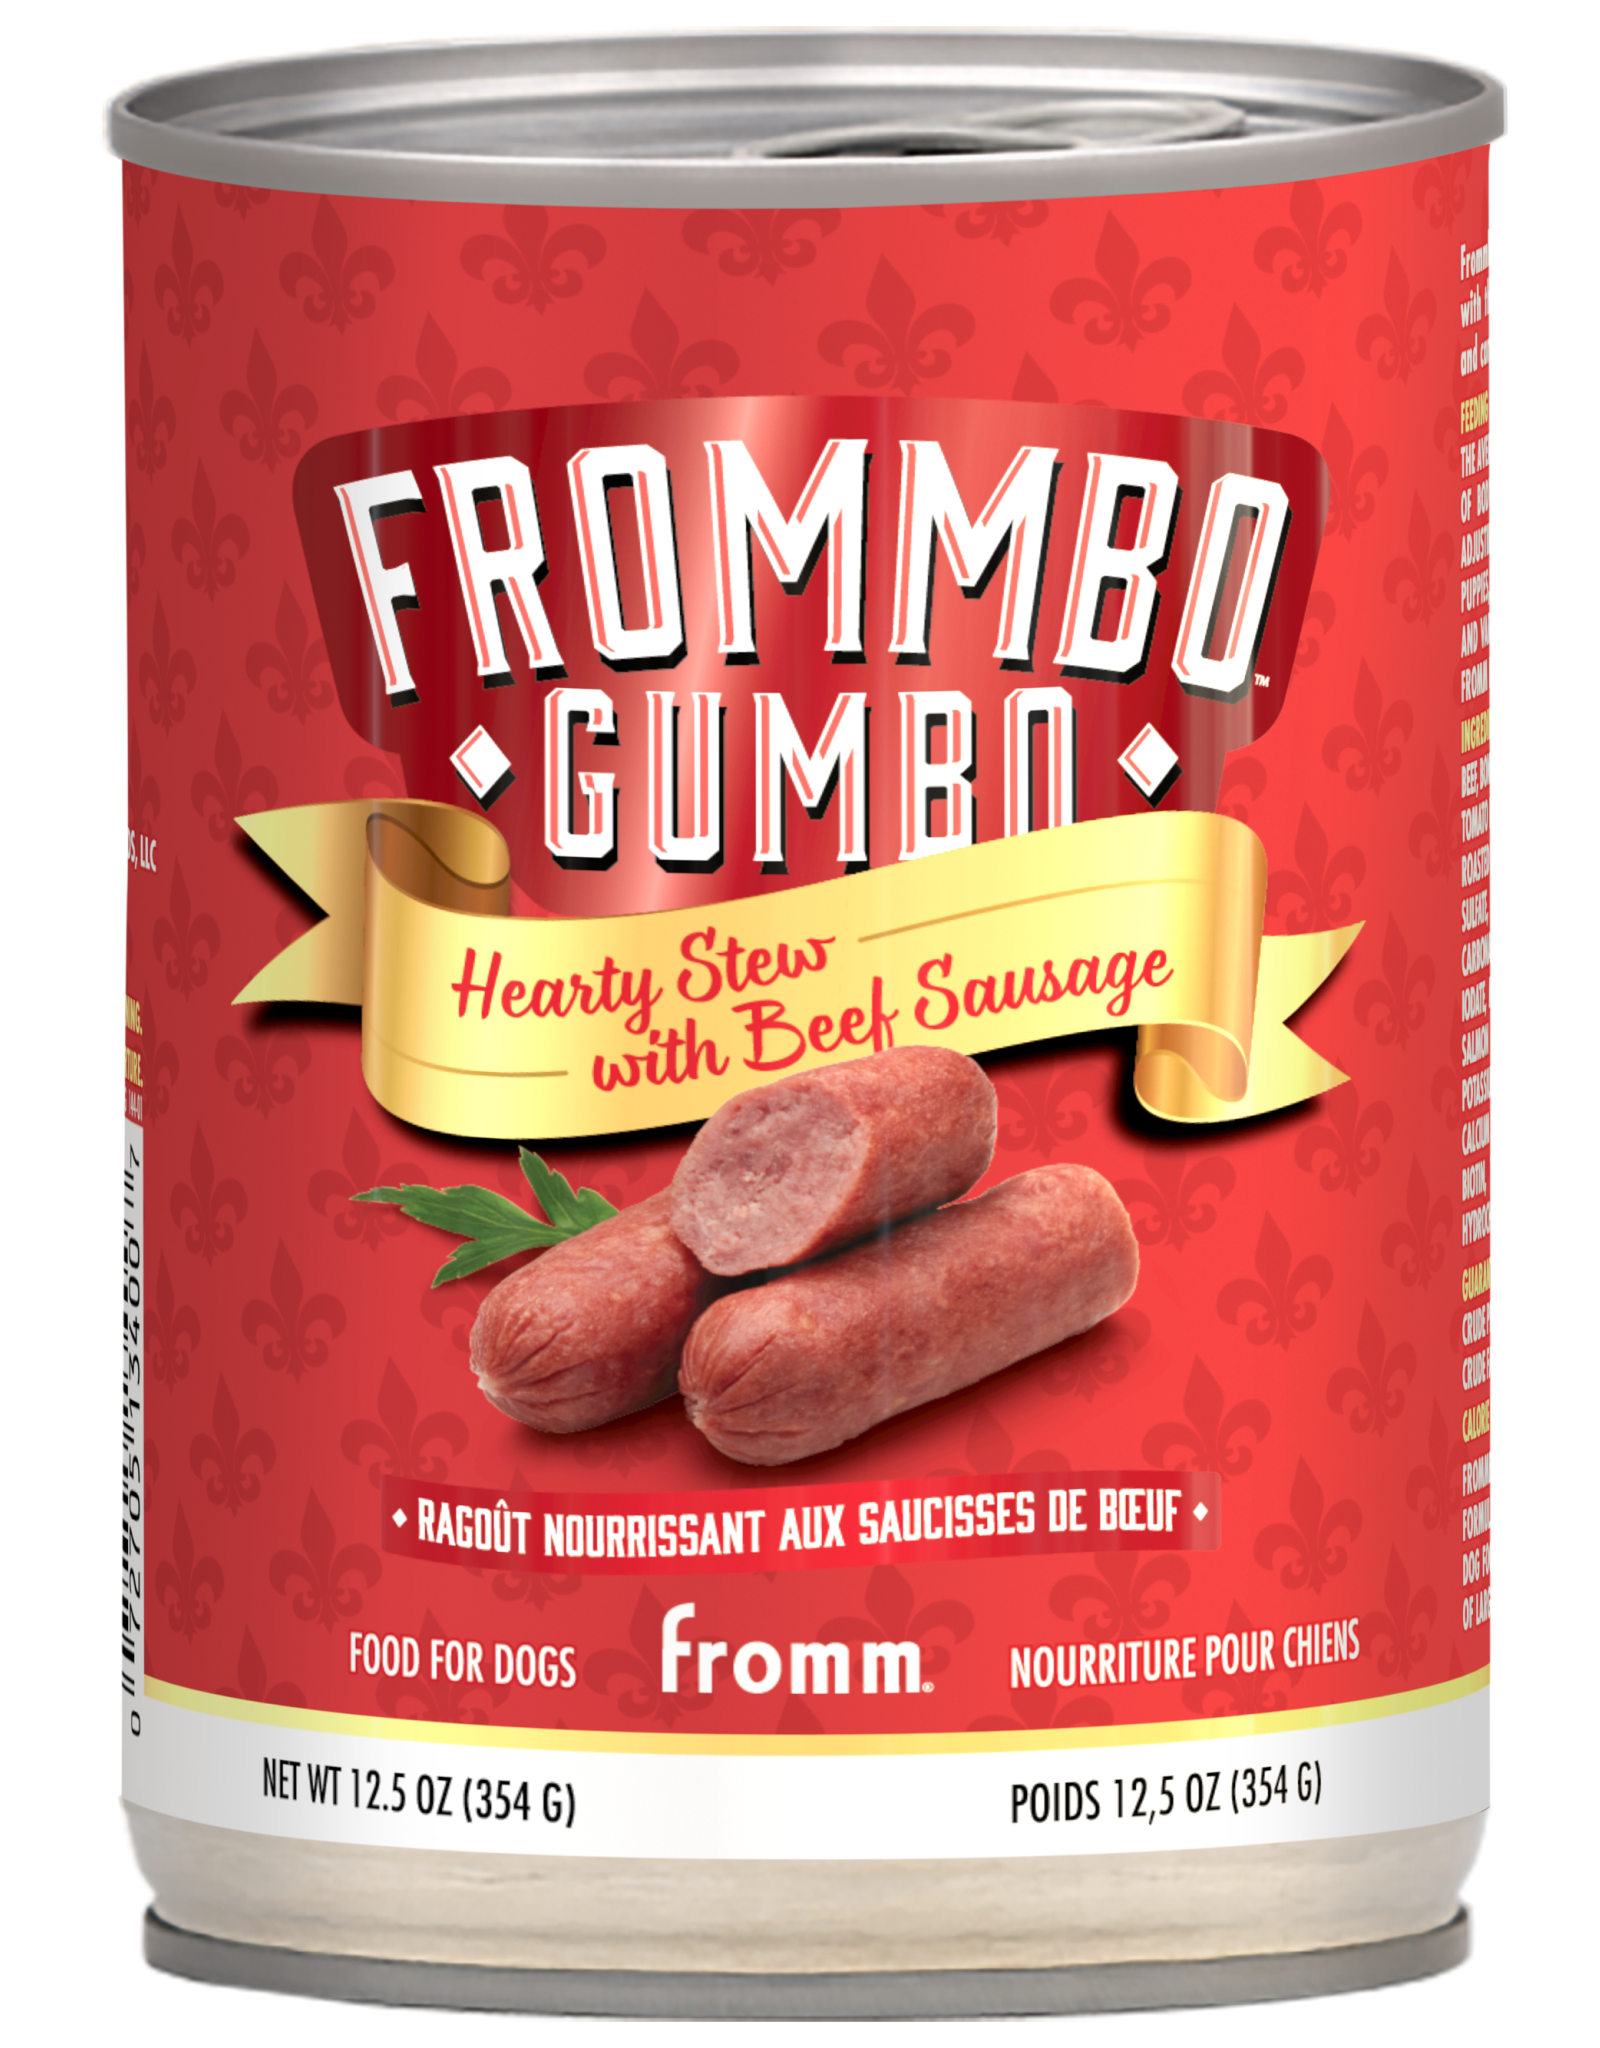 Fromm Frommbo Gumbo Hearty Stew w/ Beef Sausage: Can, 12.5 oz